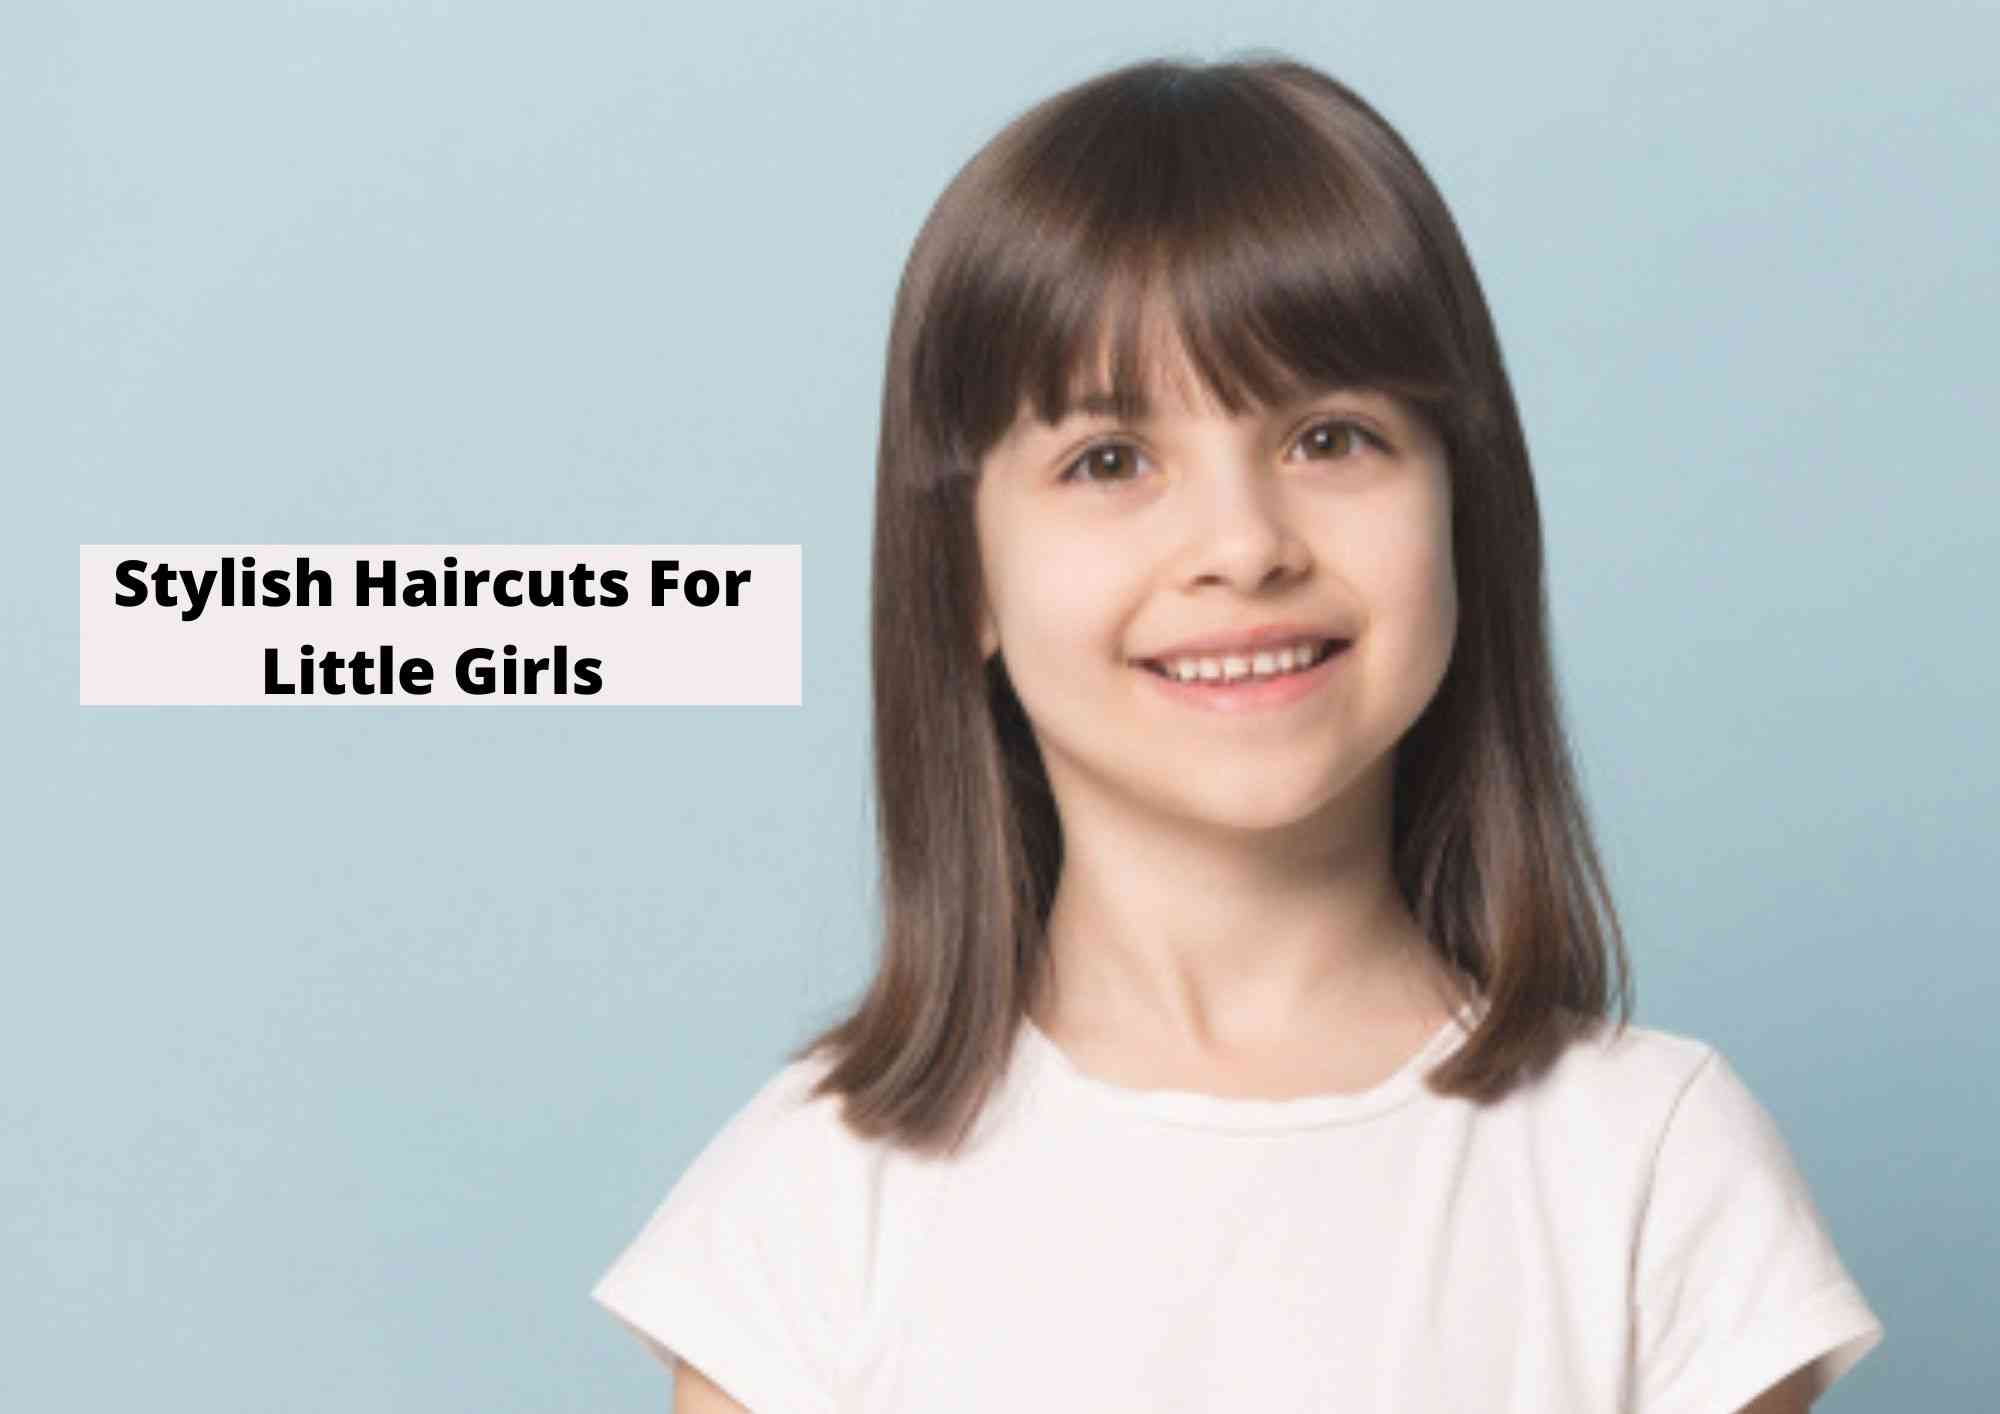 50 Toddler Hairstyles To Try Out On Your Little One Tonight!